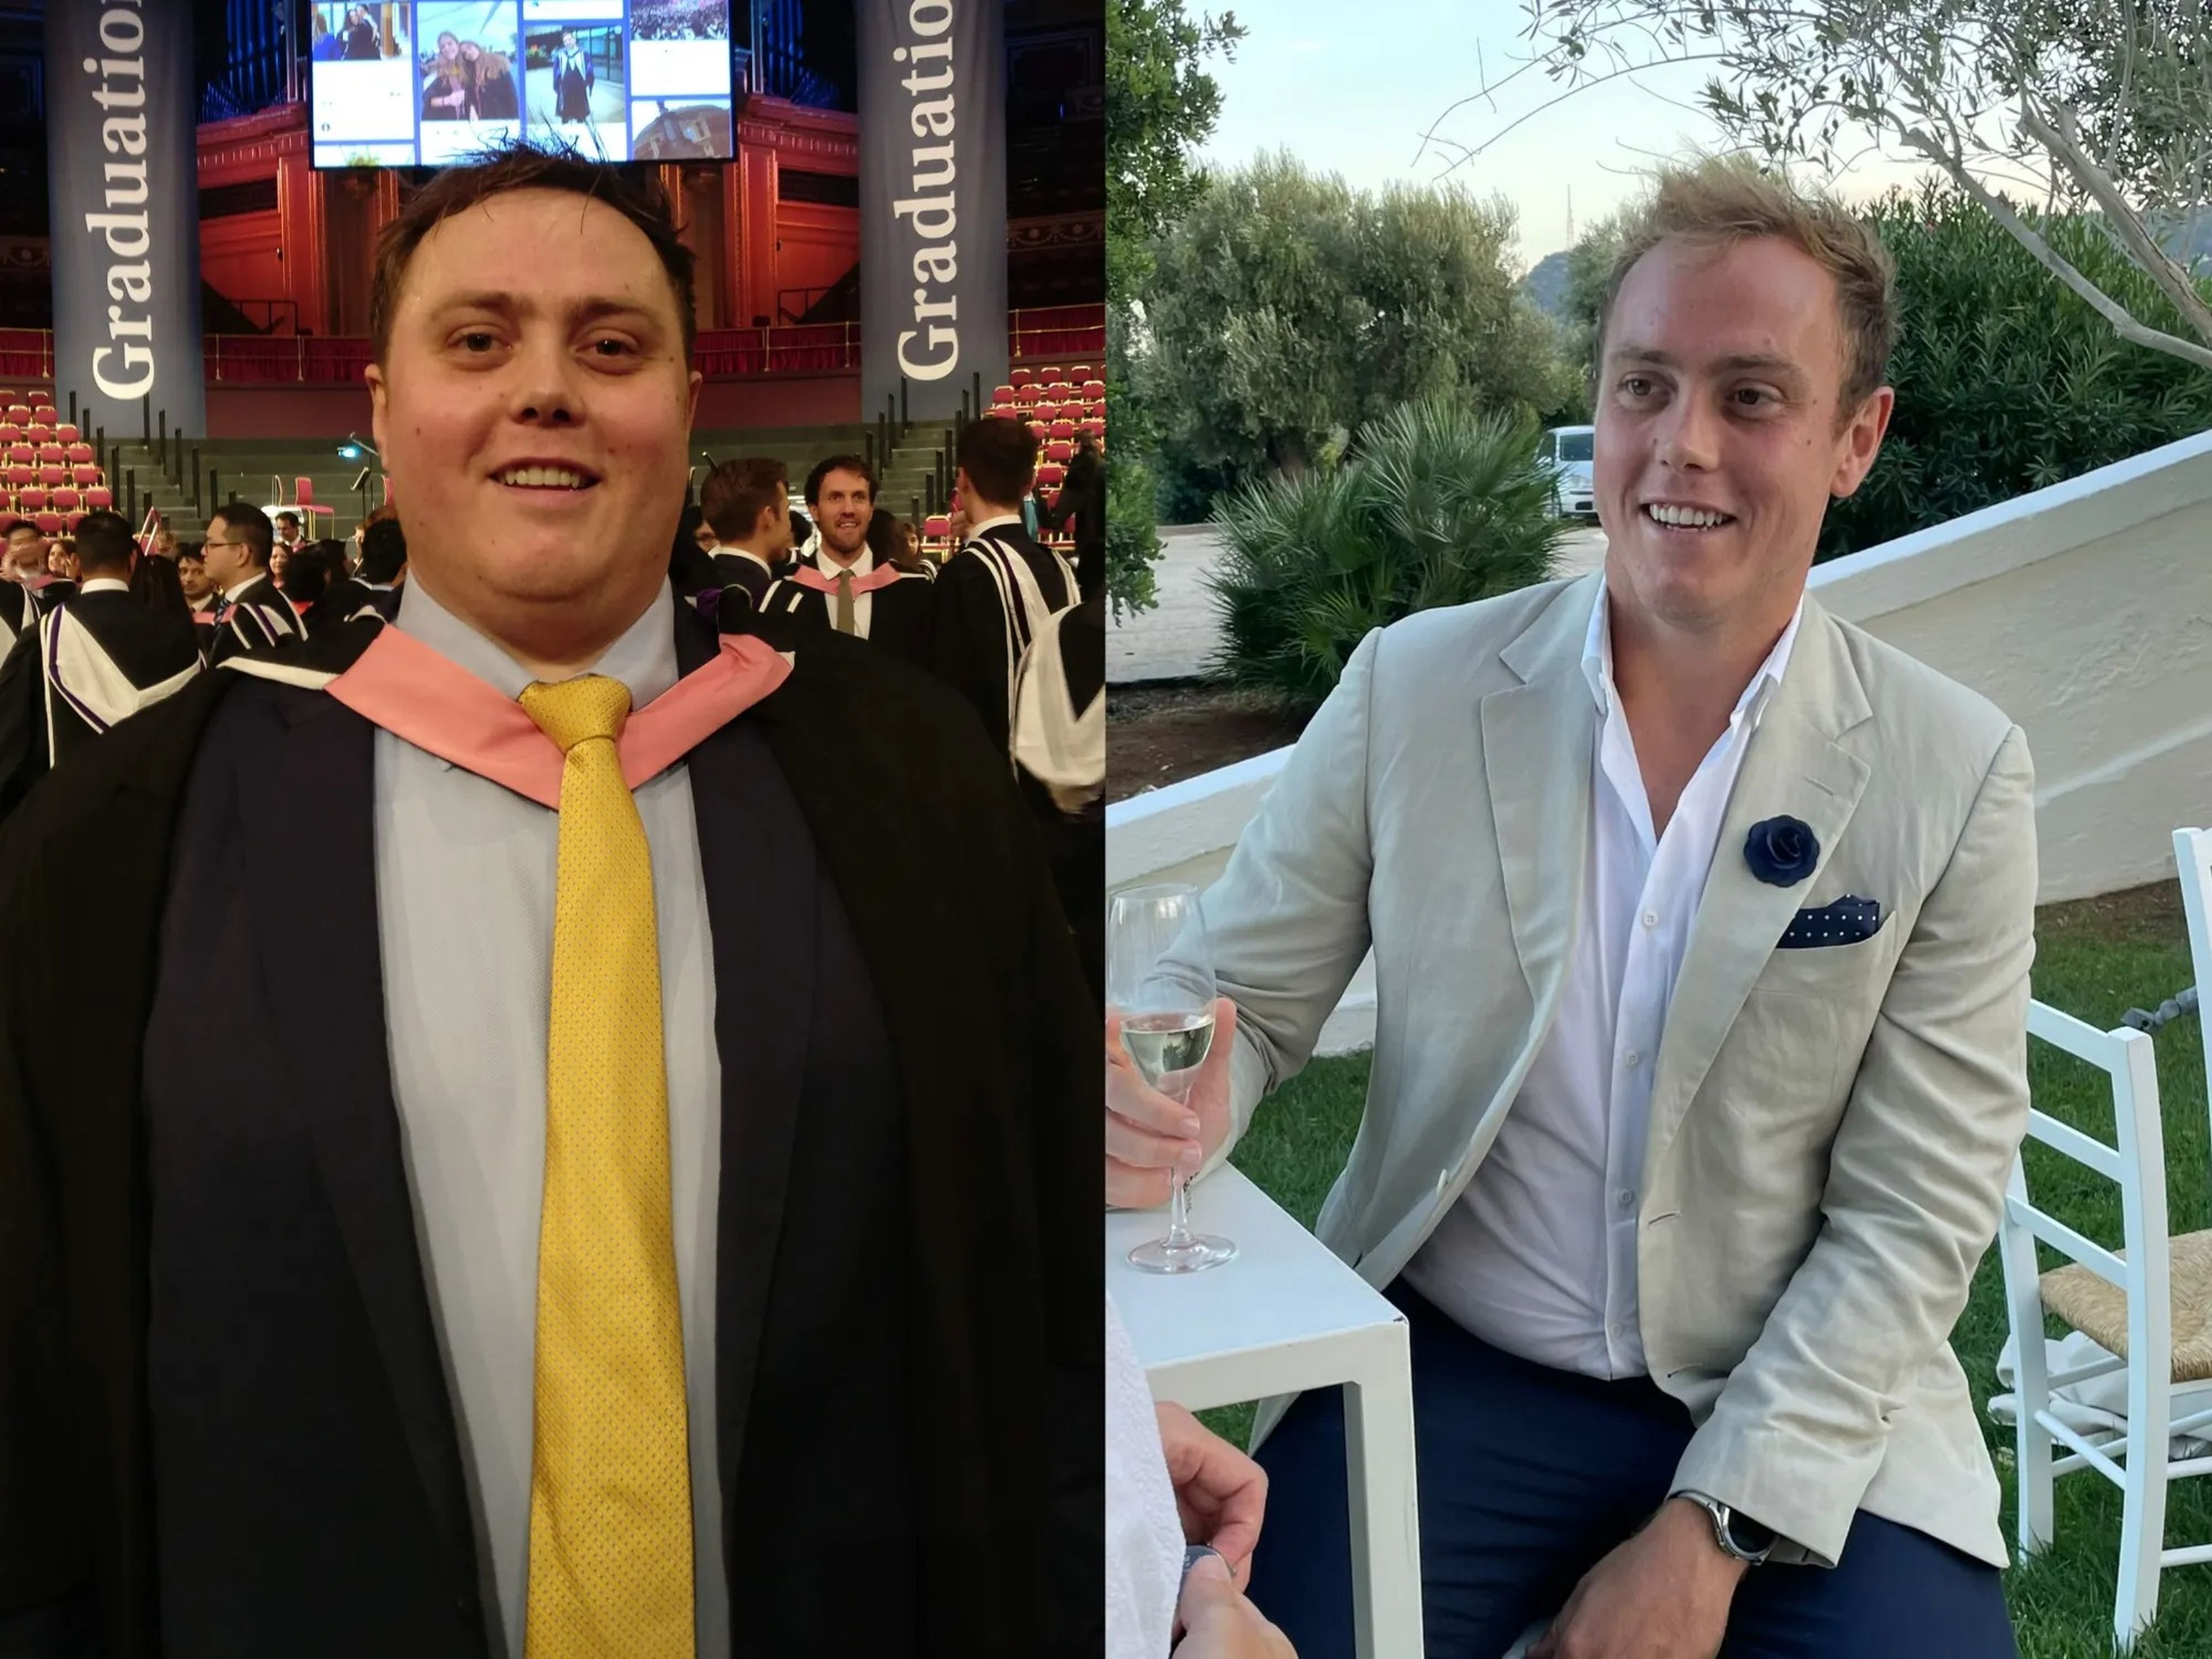 Bryan O'Keeffe before and after losing weight